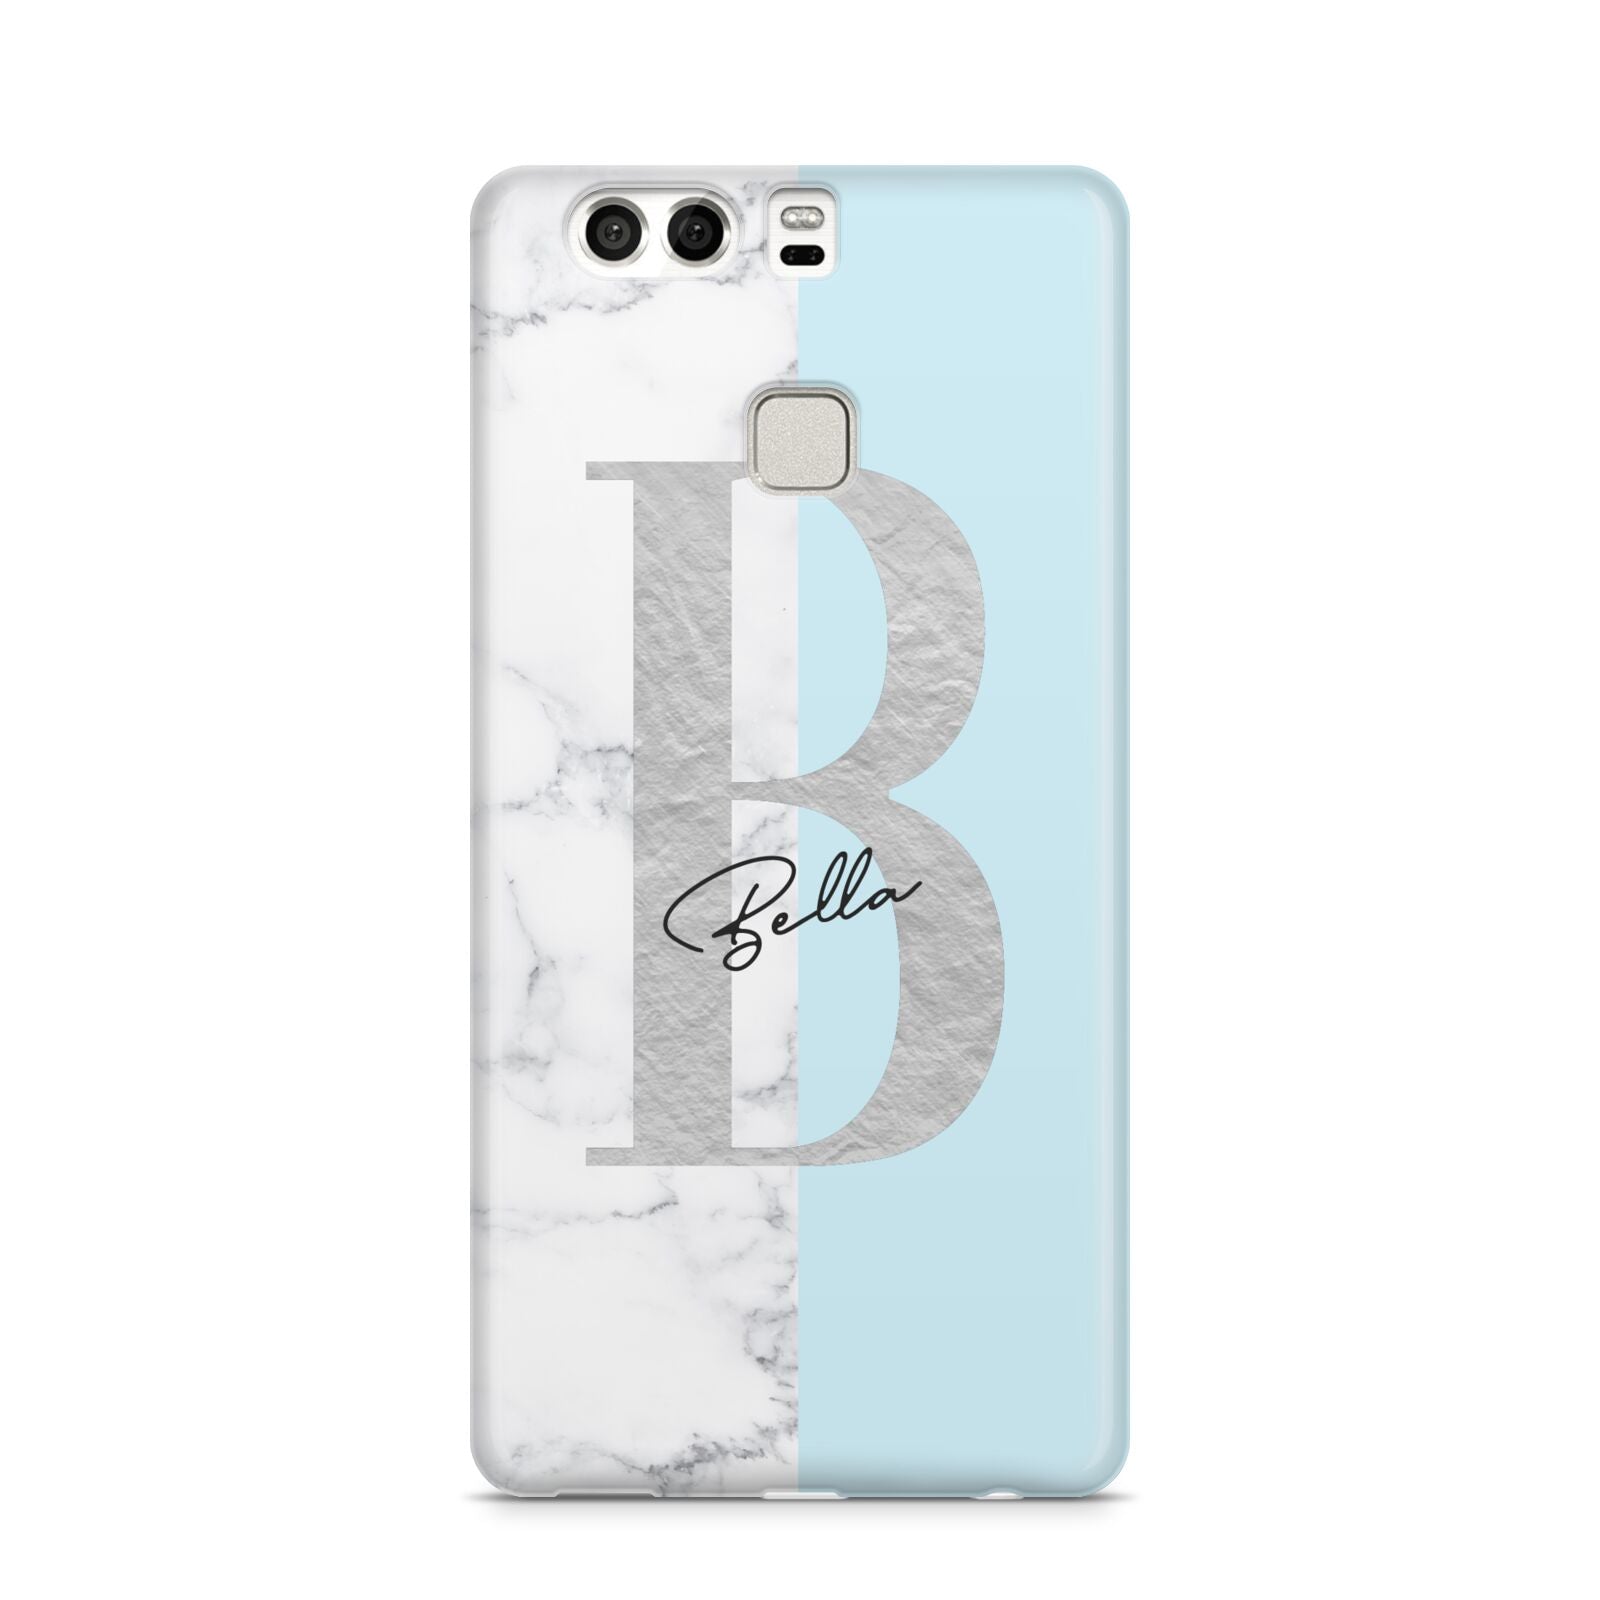 Personalised Chrome Marble Huawei P9 Case